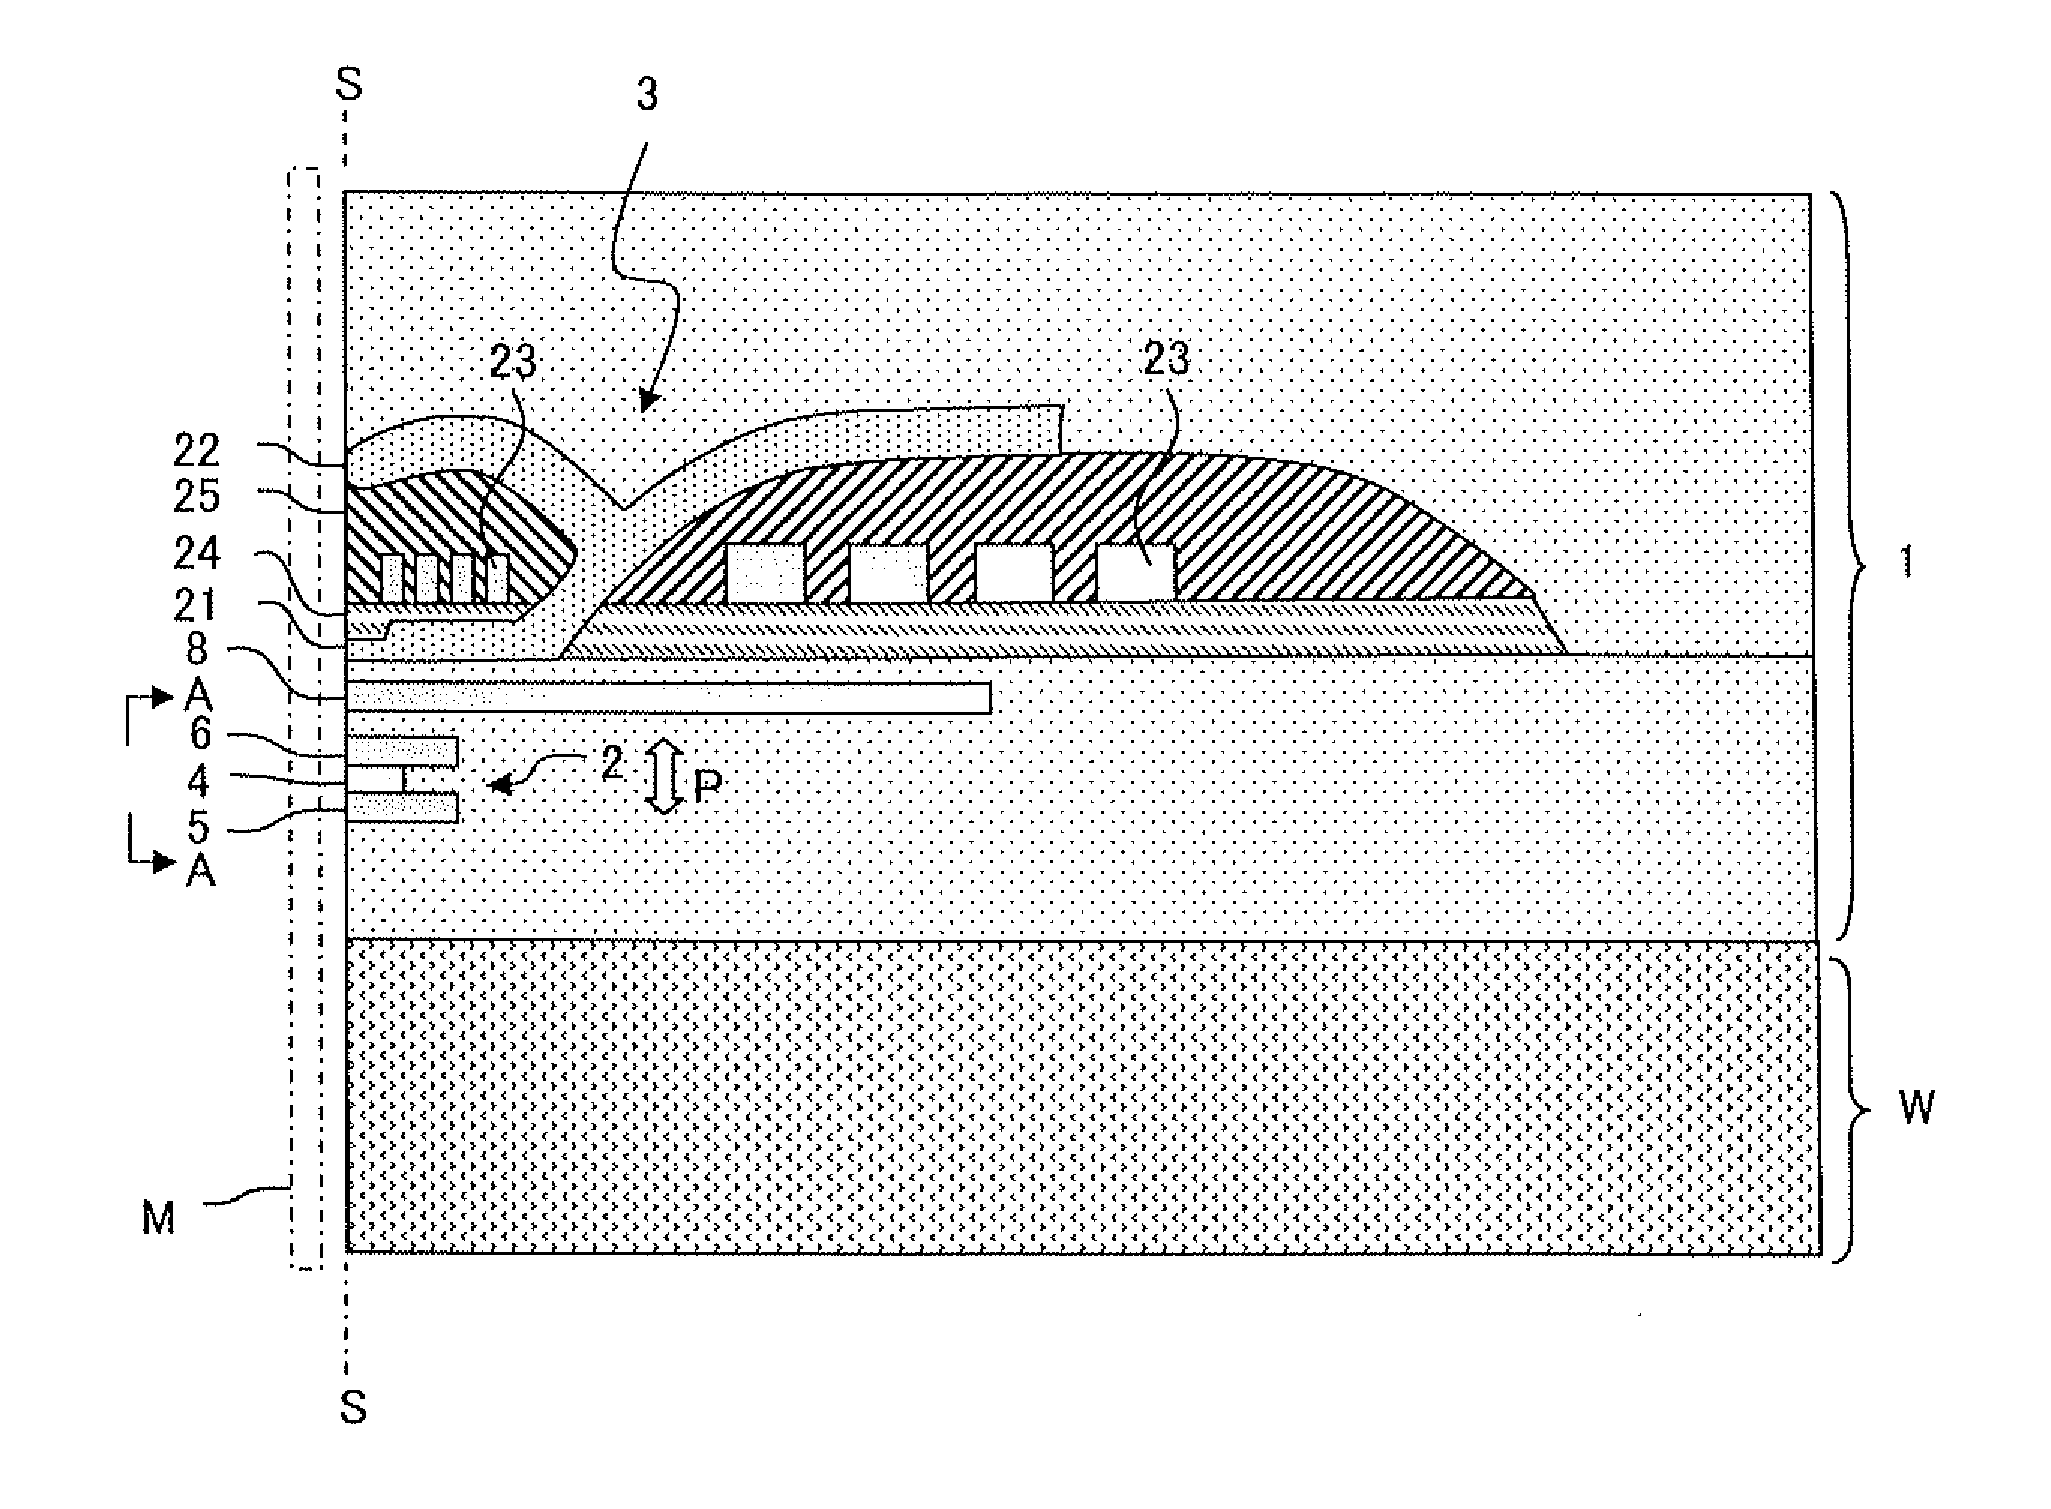 Magneto-resistive effect element having spacer layer containing gallium oxide, partially oxidized copper